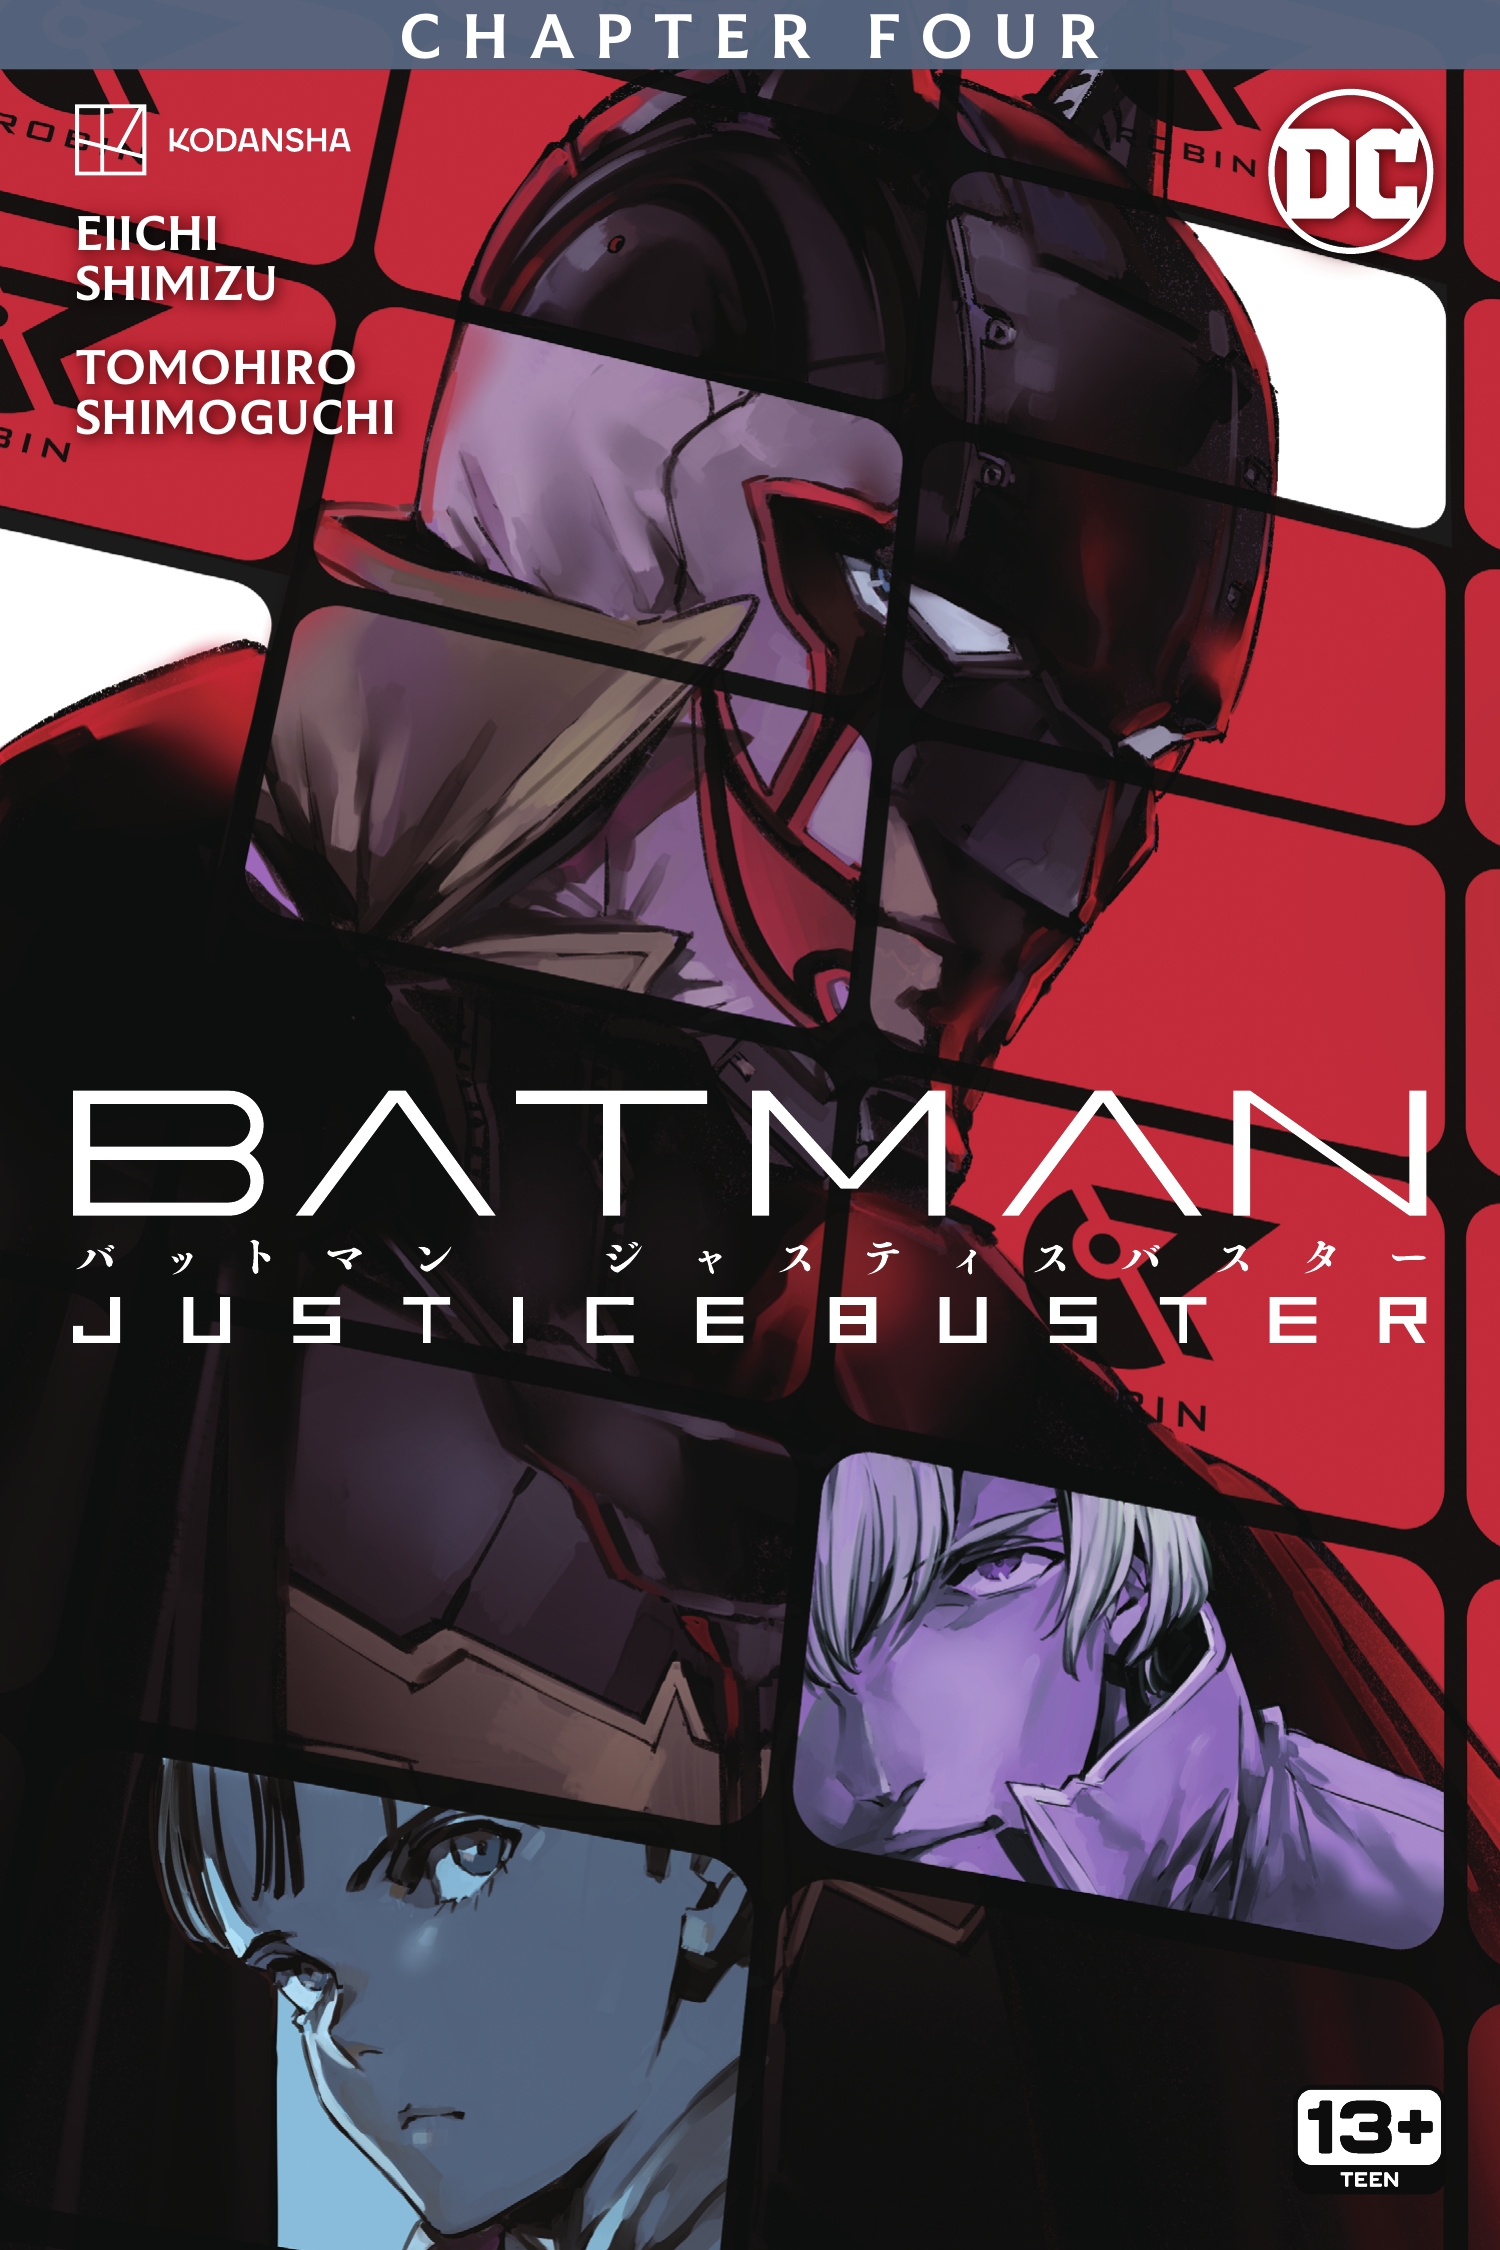 Read online Batman: Justice Buster comic -  Issue #4 - 1